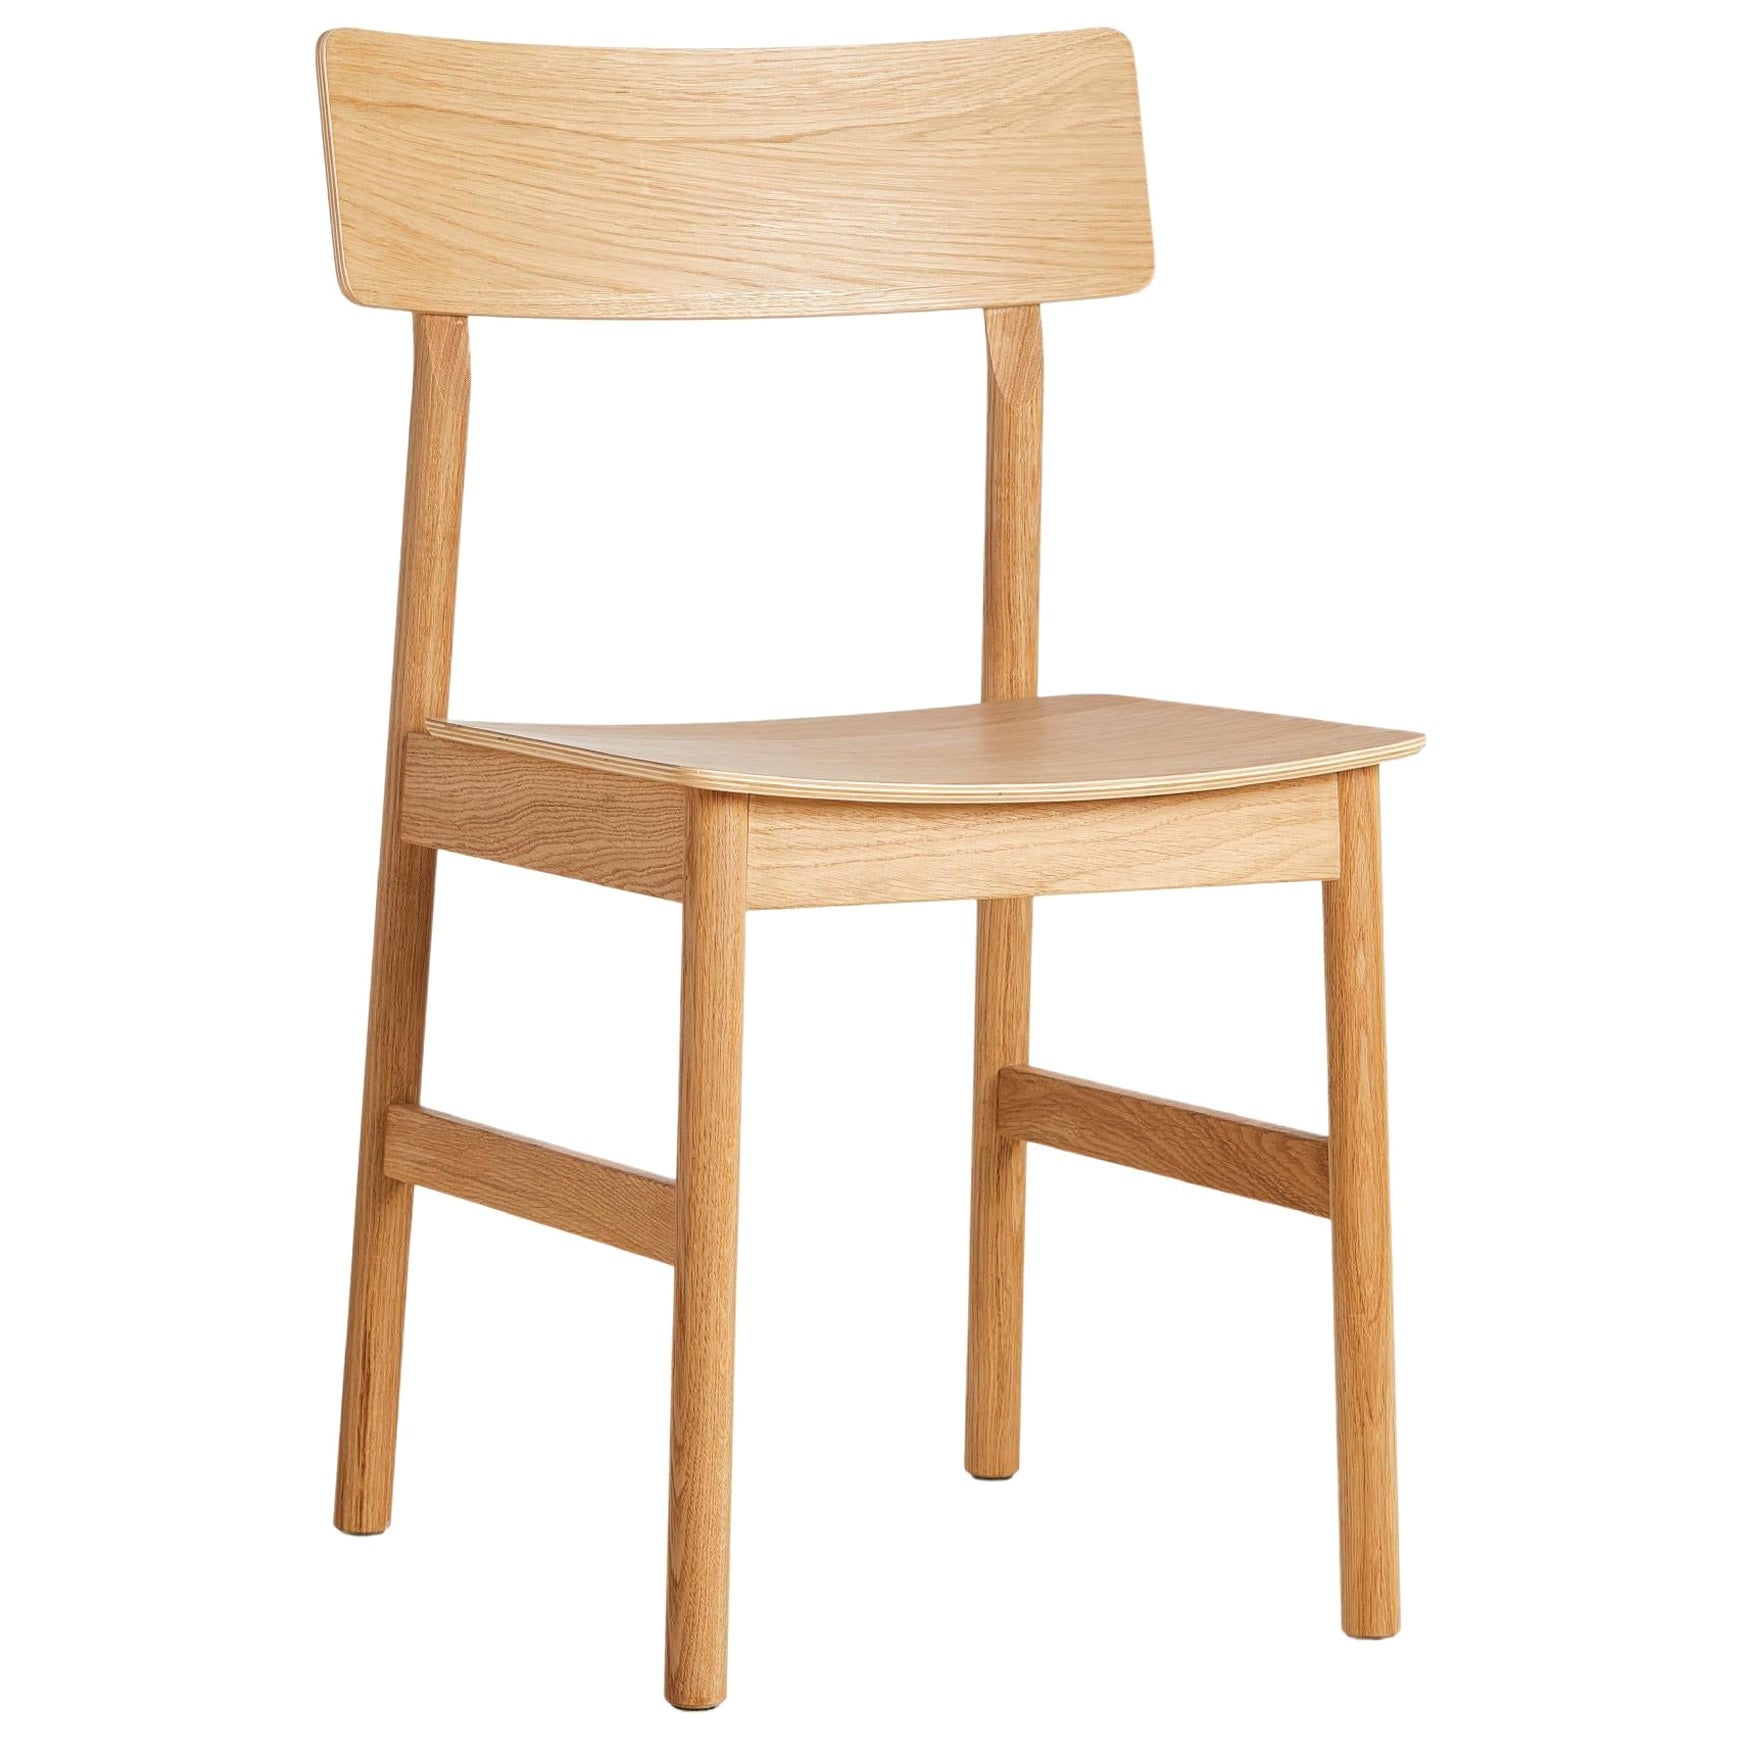 Pause Oiled Oak Dining Chair 2.0 by Kasper Nyman